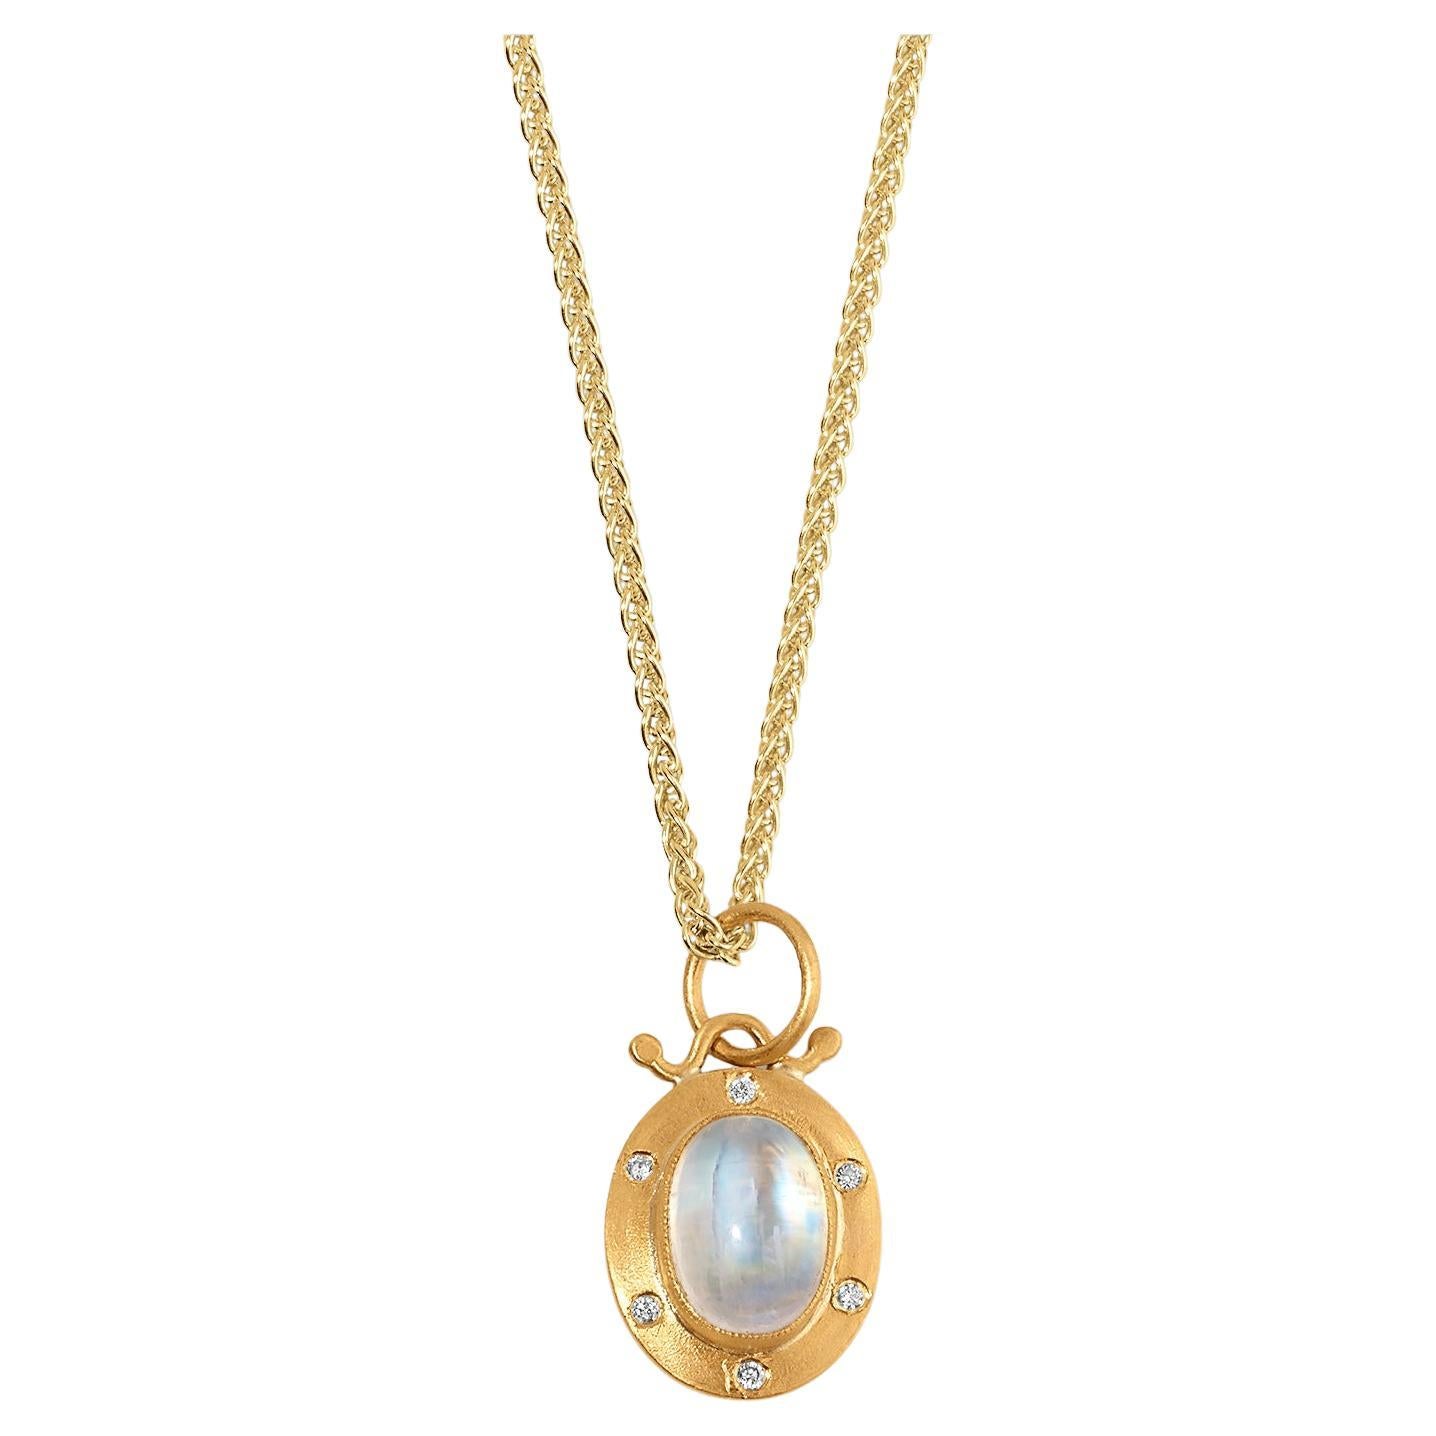 Oval Moonstone Charm Pendant Necklace with Diamonds, 24kt Gold and Silver by Prehistoric Works of Istanbul, Turkey. Opal - 2.60cts, Diamonds - 0.06cts. This stunning opal is framed in 24kt gold with six diamonds.  This piece is sure to make a